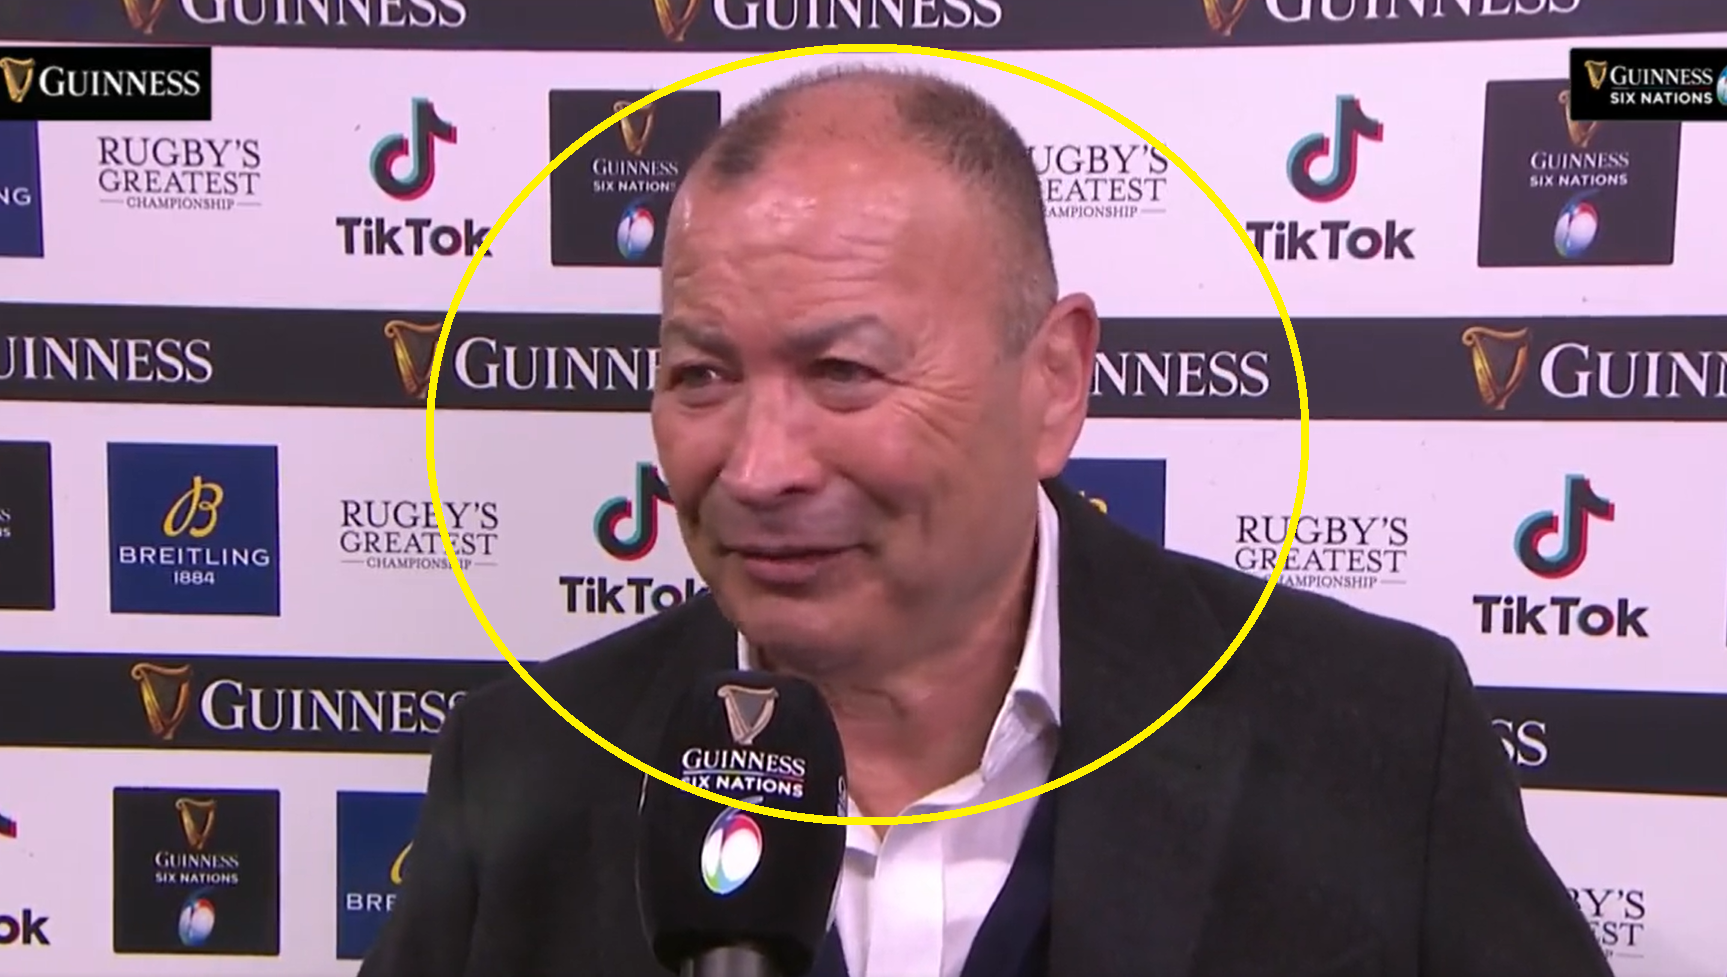 There was an air of desperation in Eddie Jones' post game interview